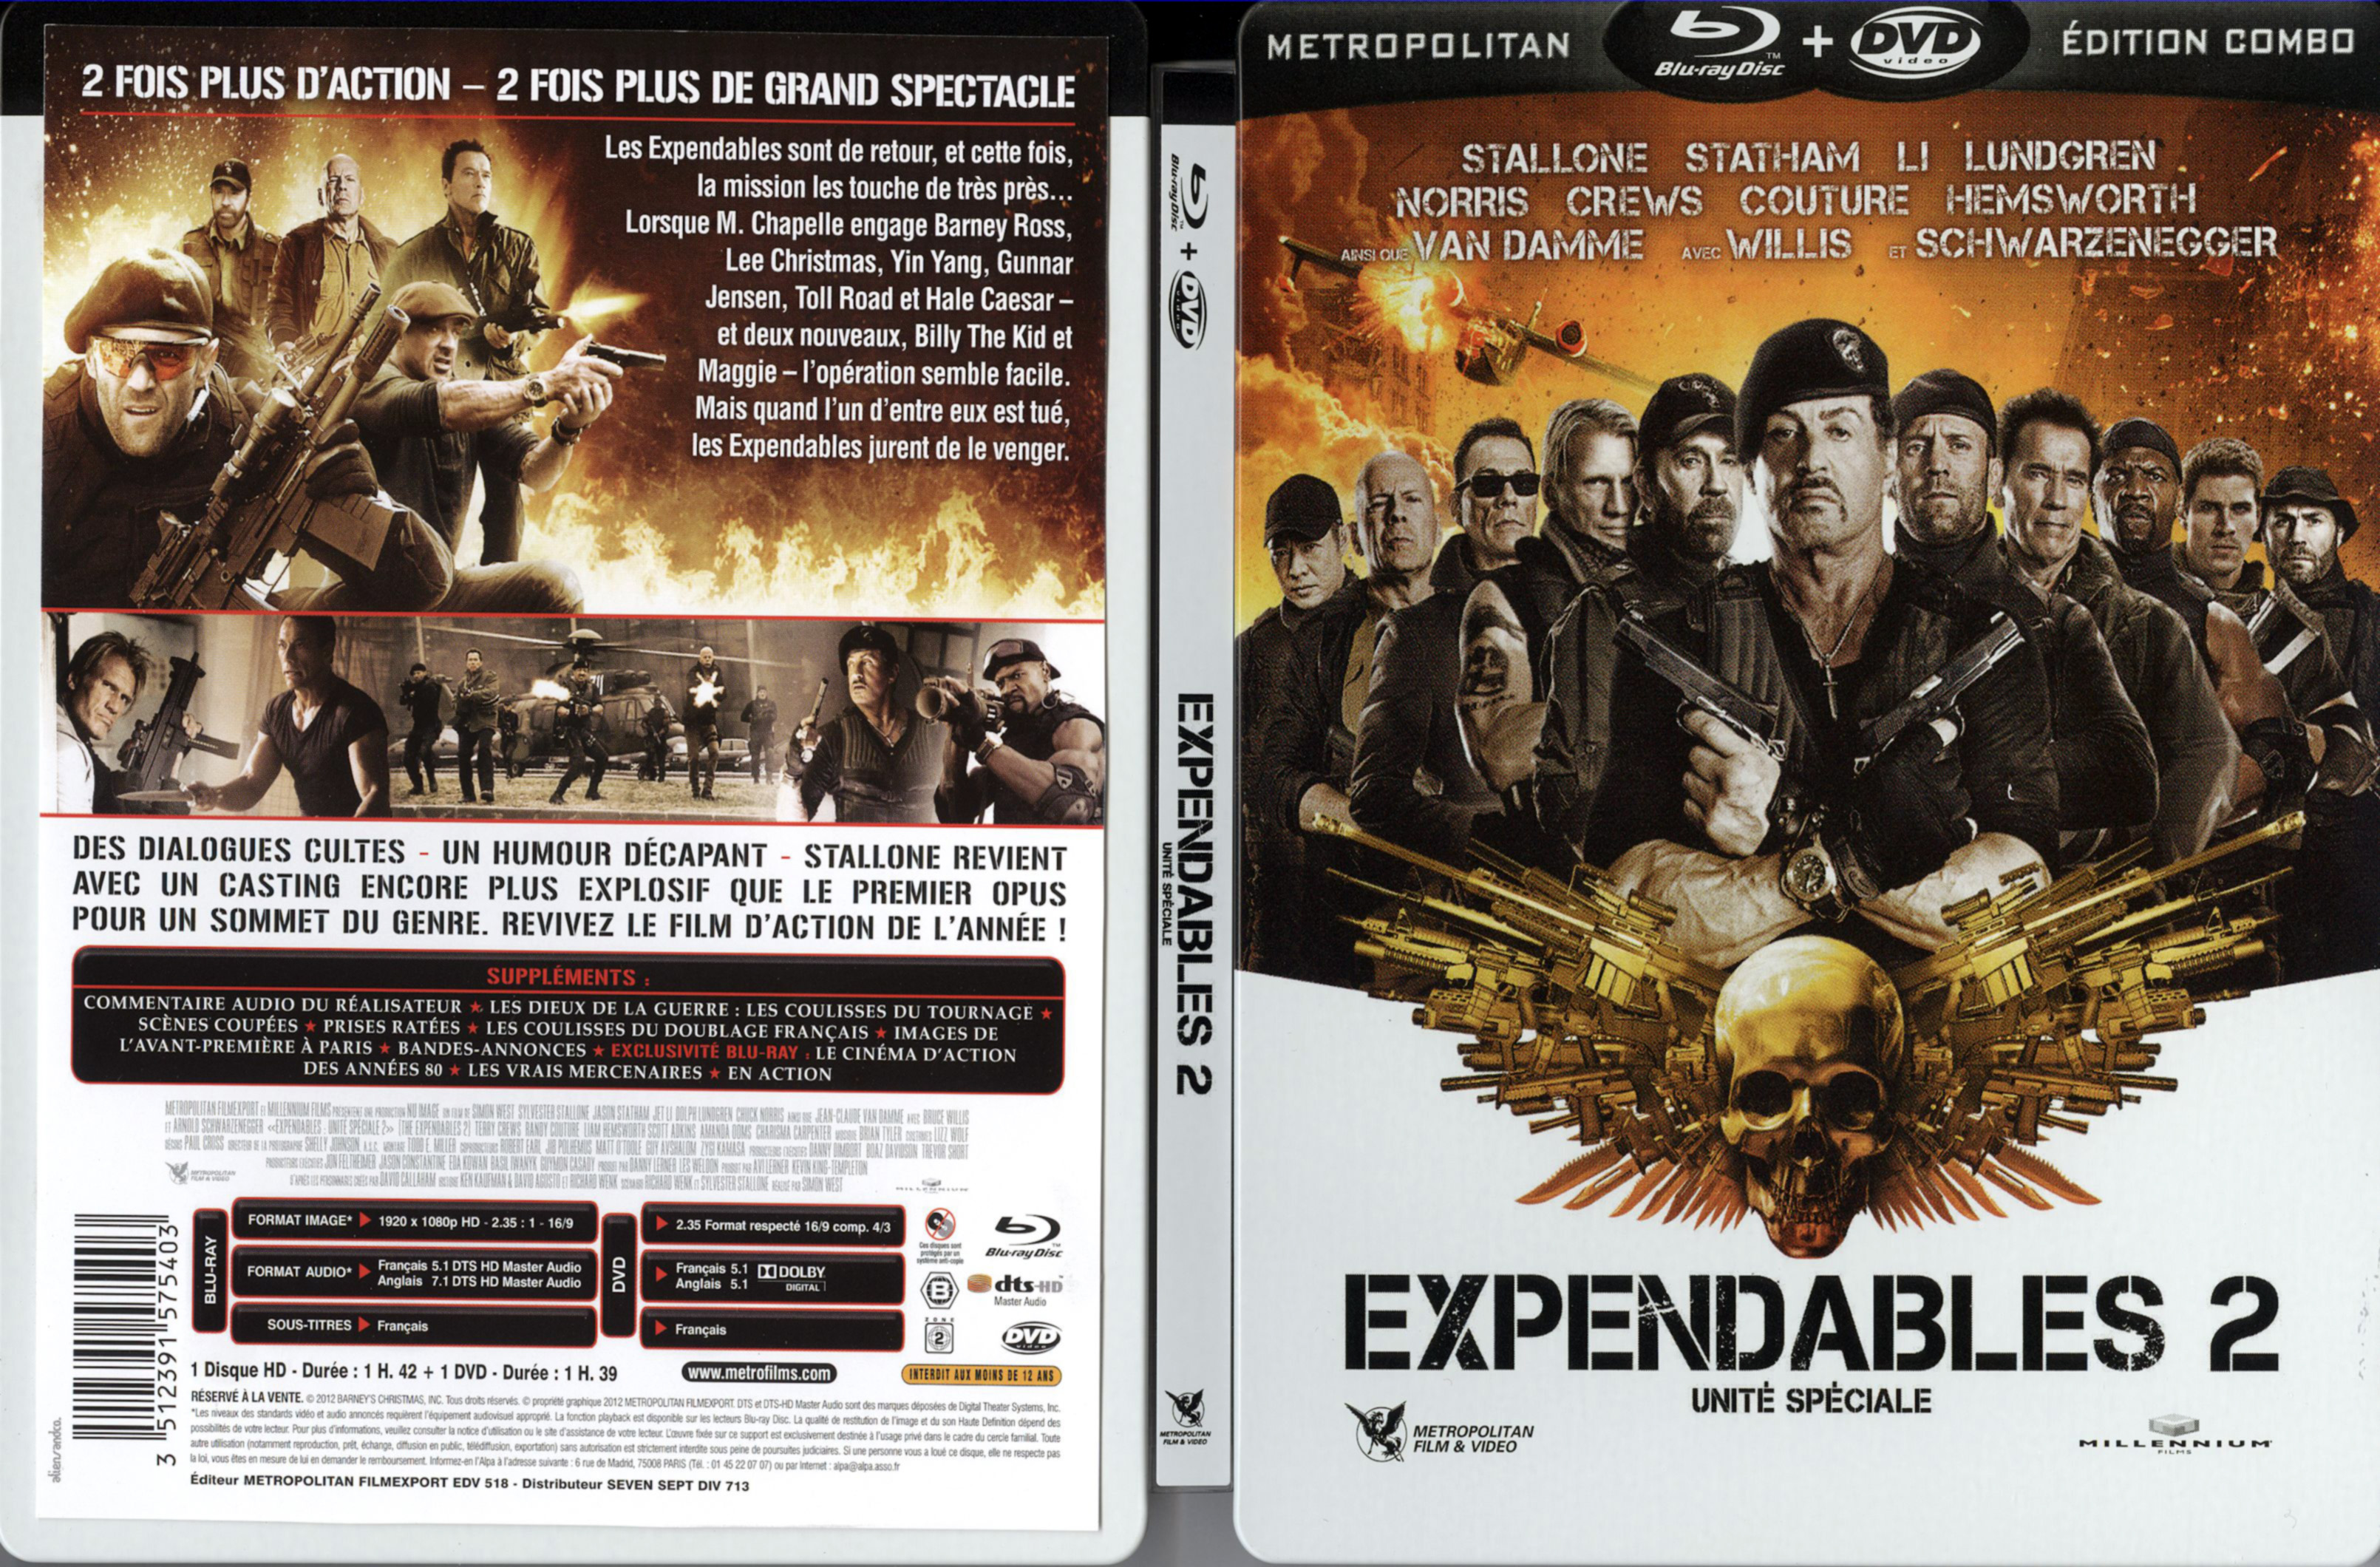 Jaquette DVD The Expendables 2 (BLU-RAY) v2